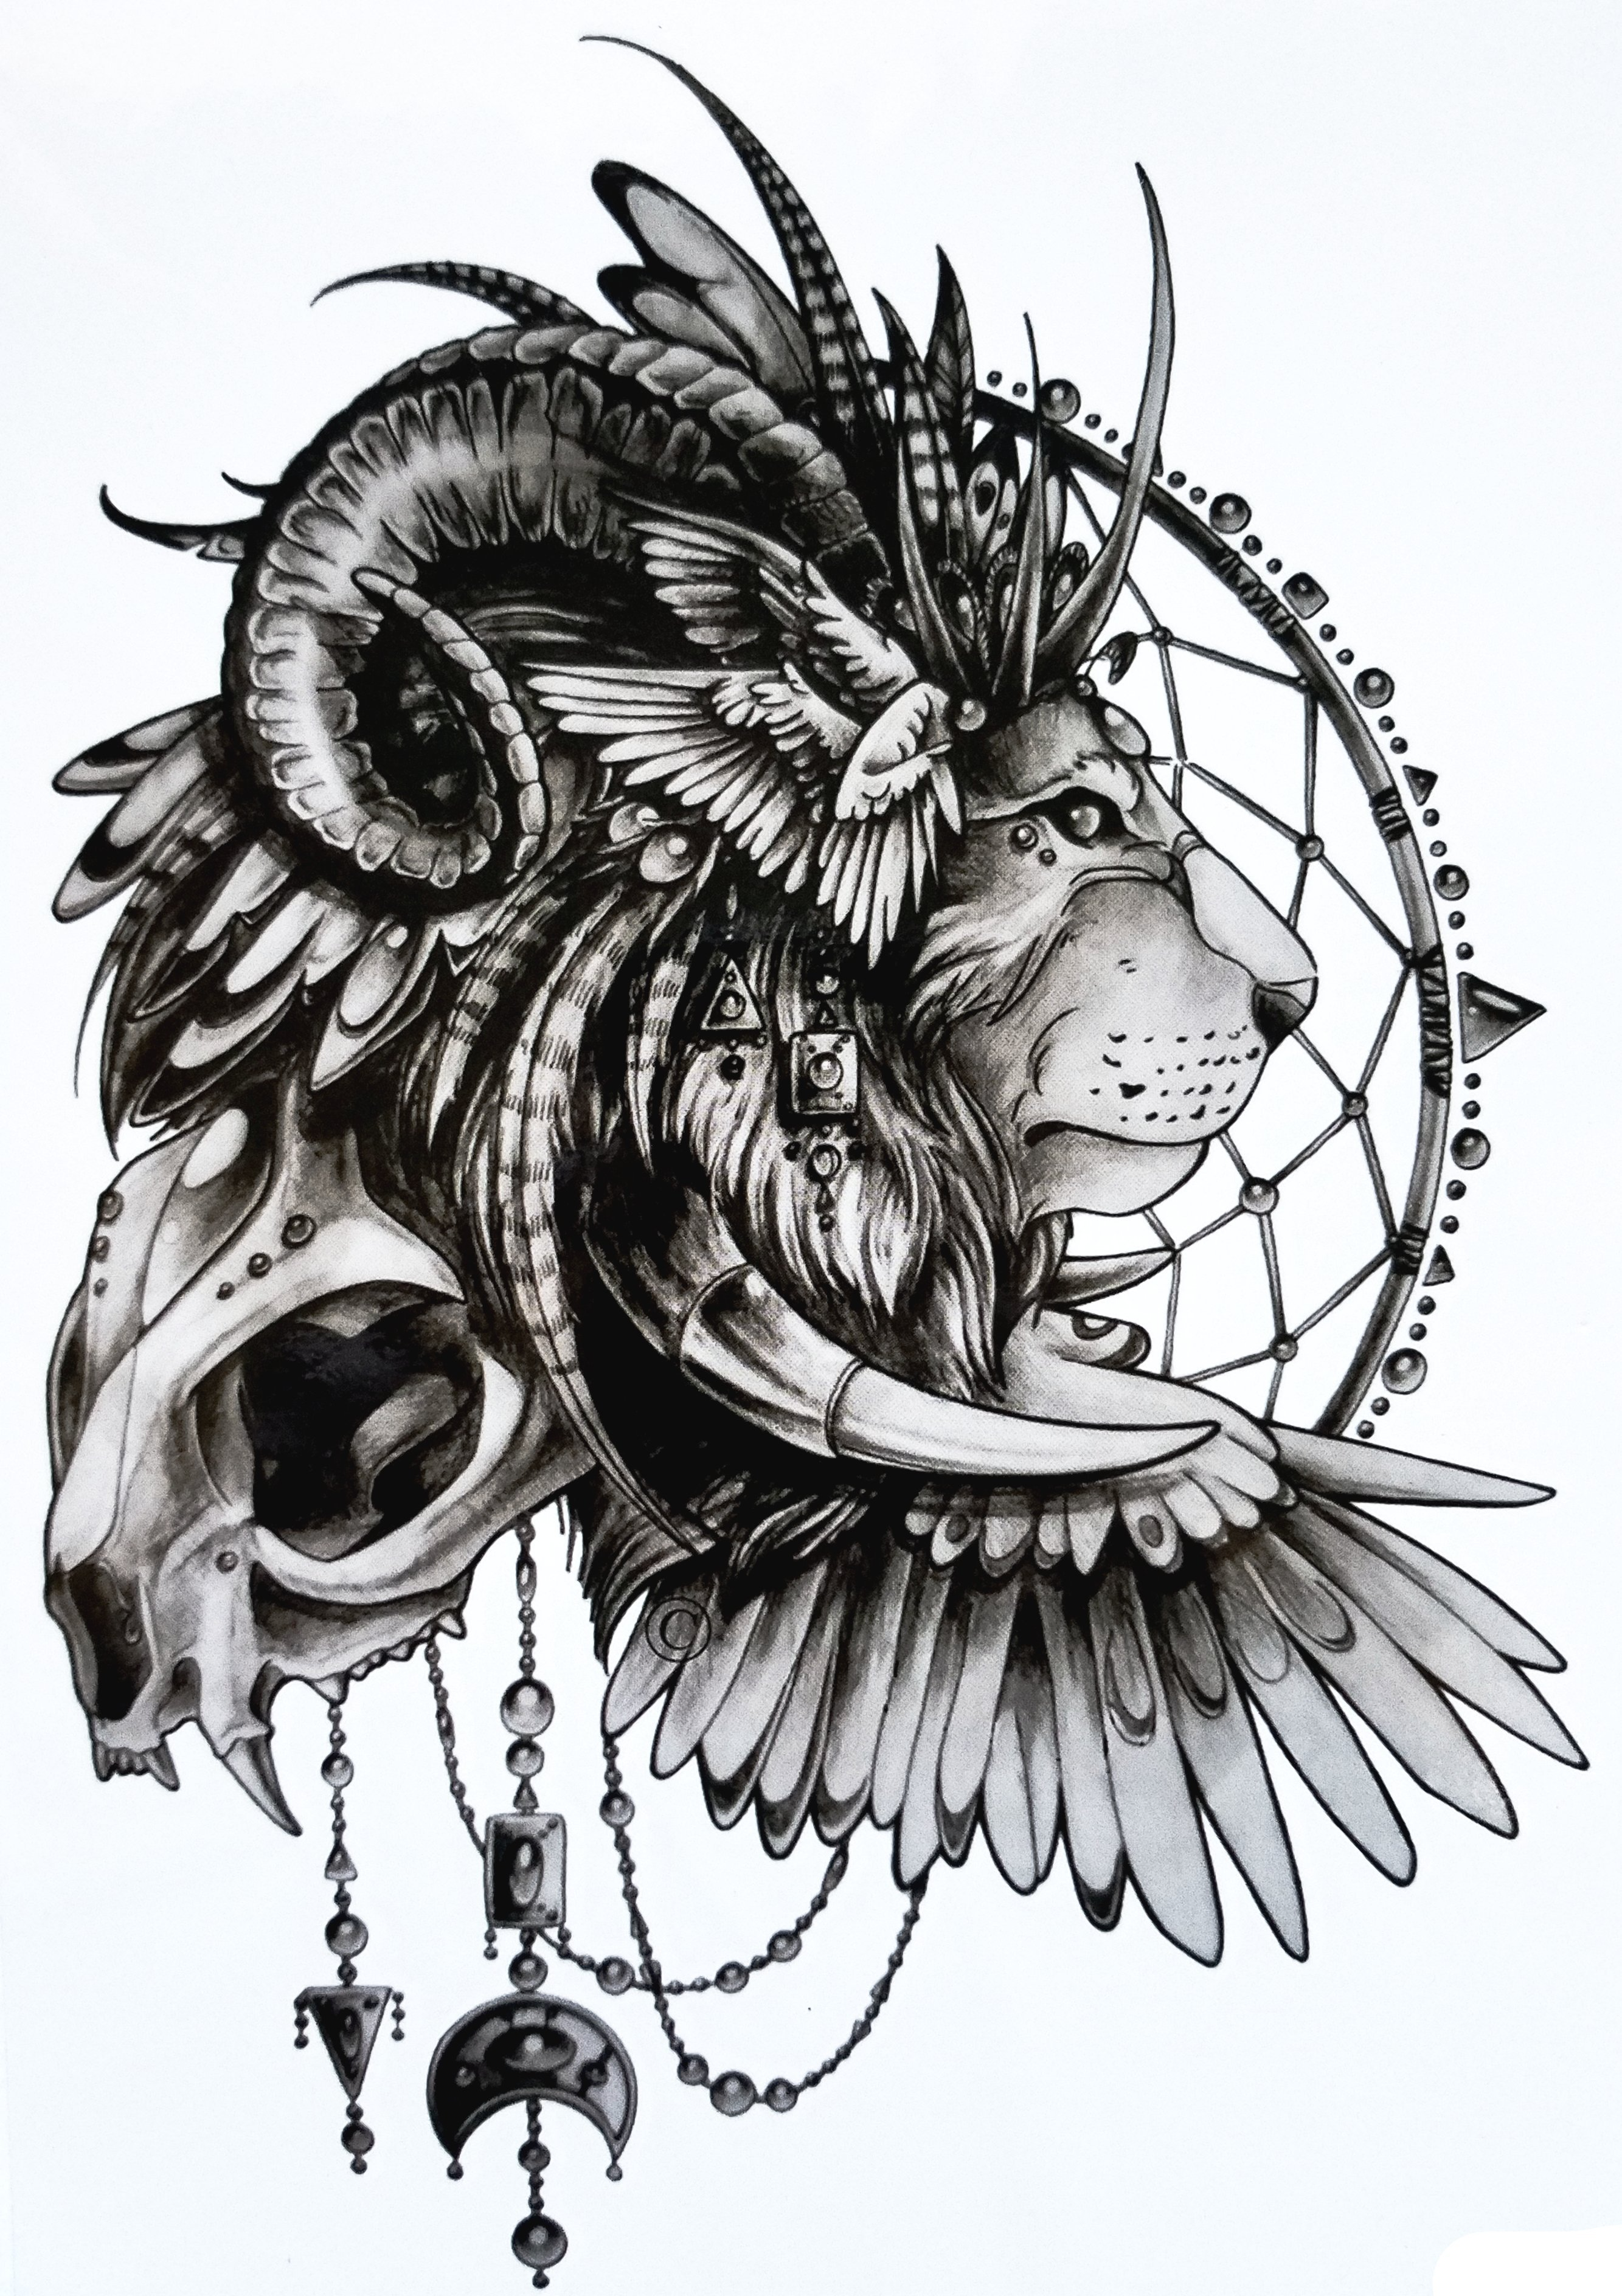 Lion Dreamcatcher Temporary Tattoo  Black Large for Men and Women